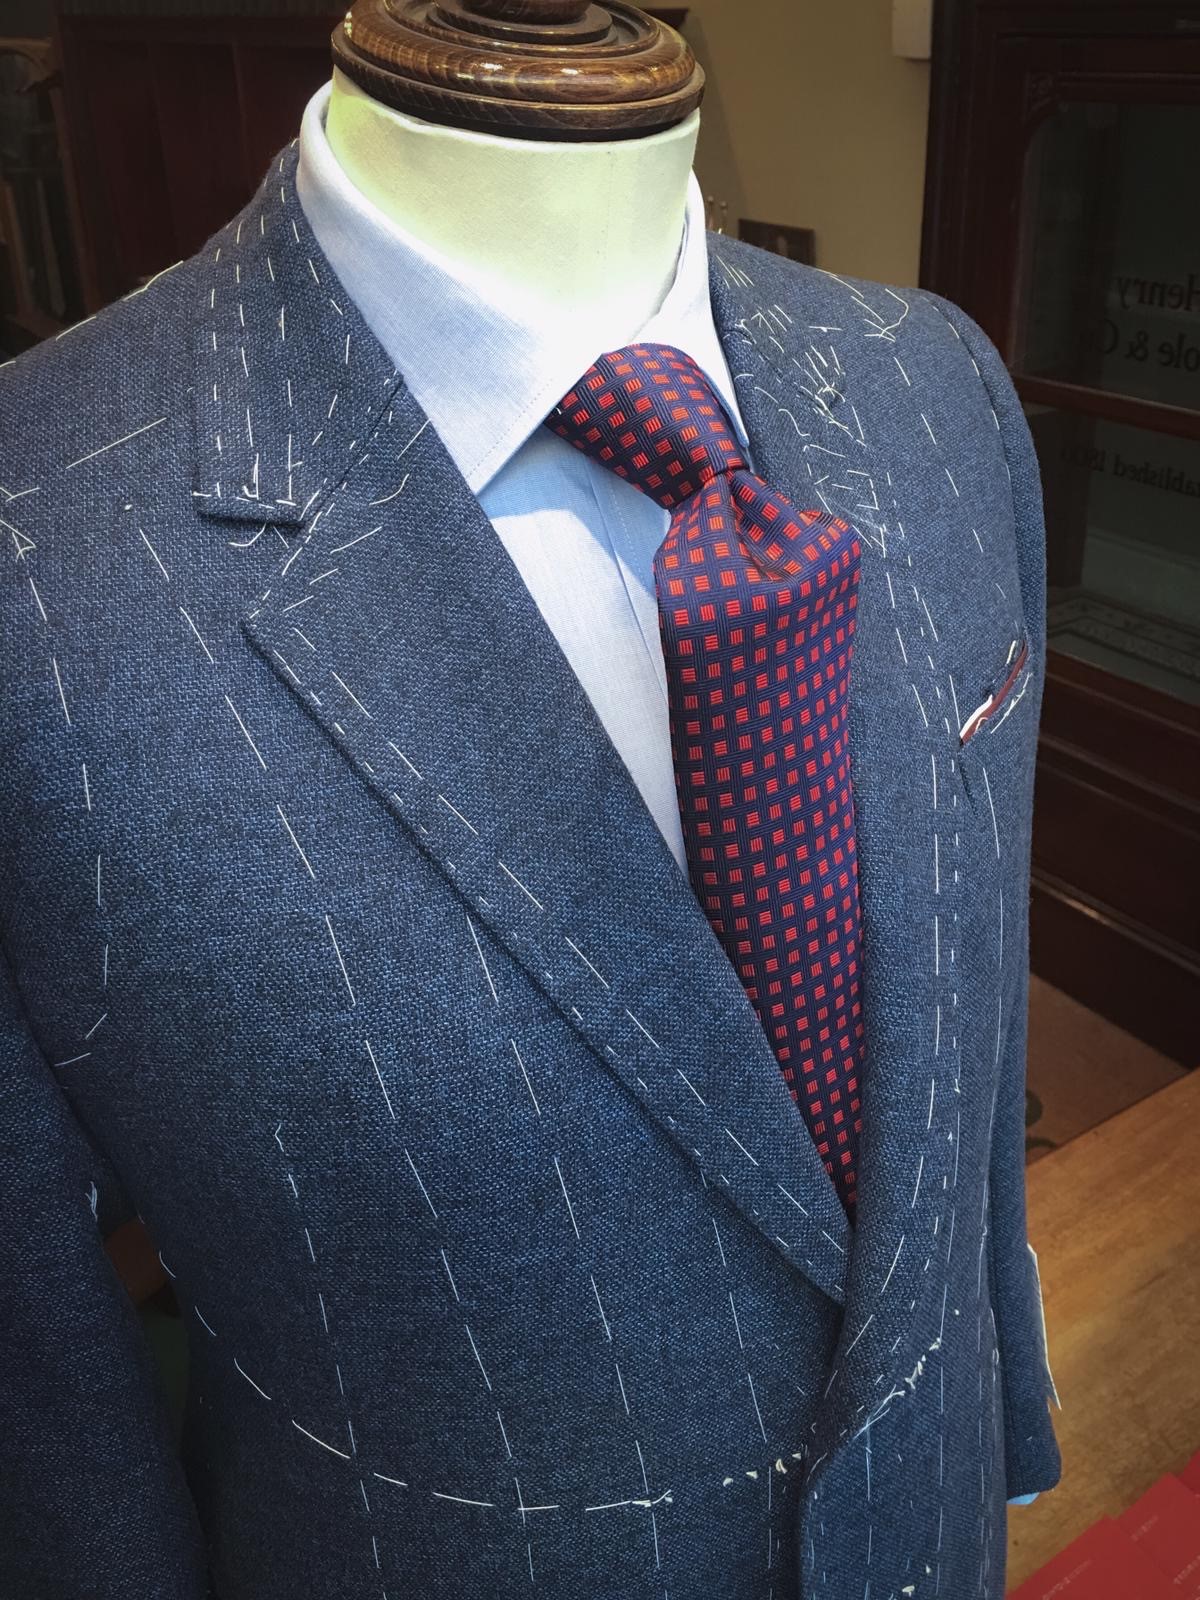 Henry Poole & Co celebrates the natural wonders of wool - Henry Poole ...